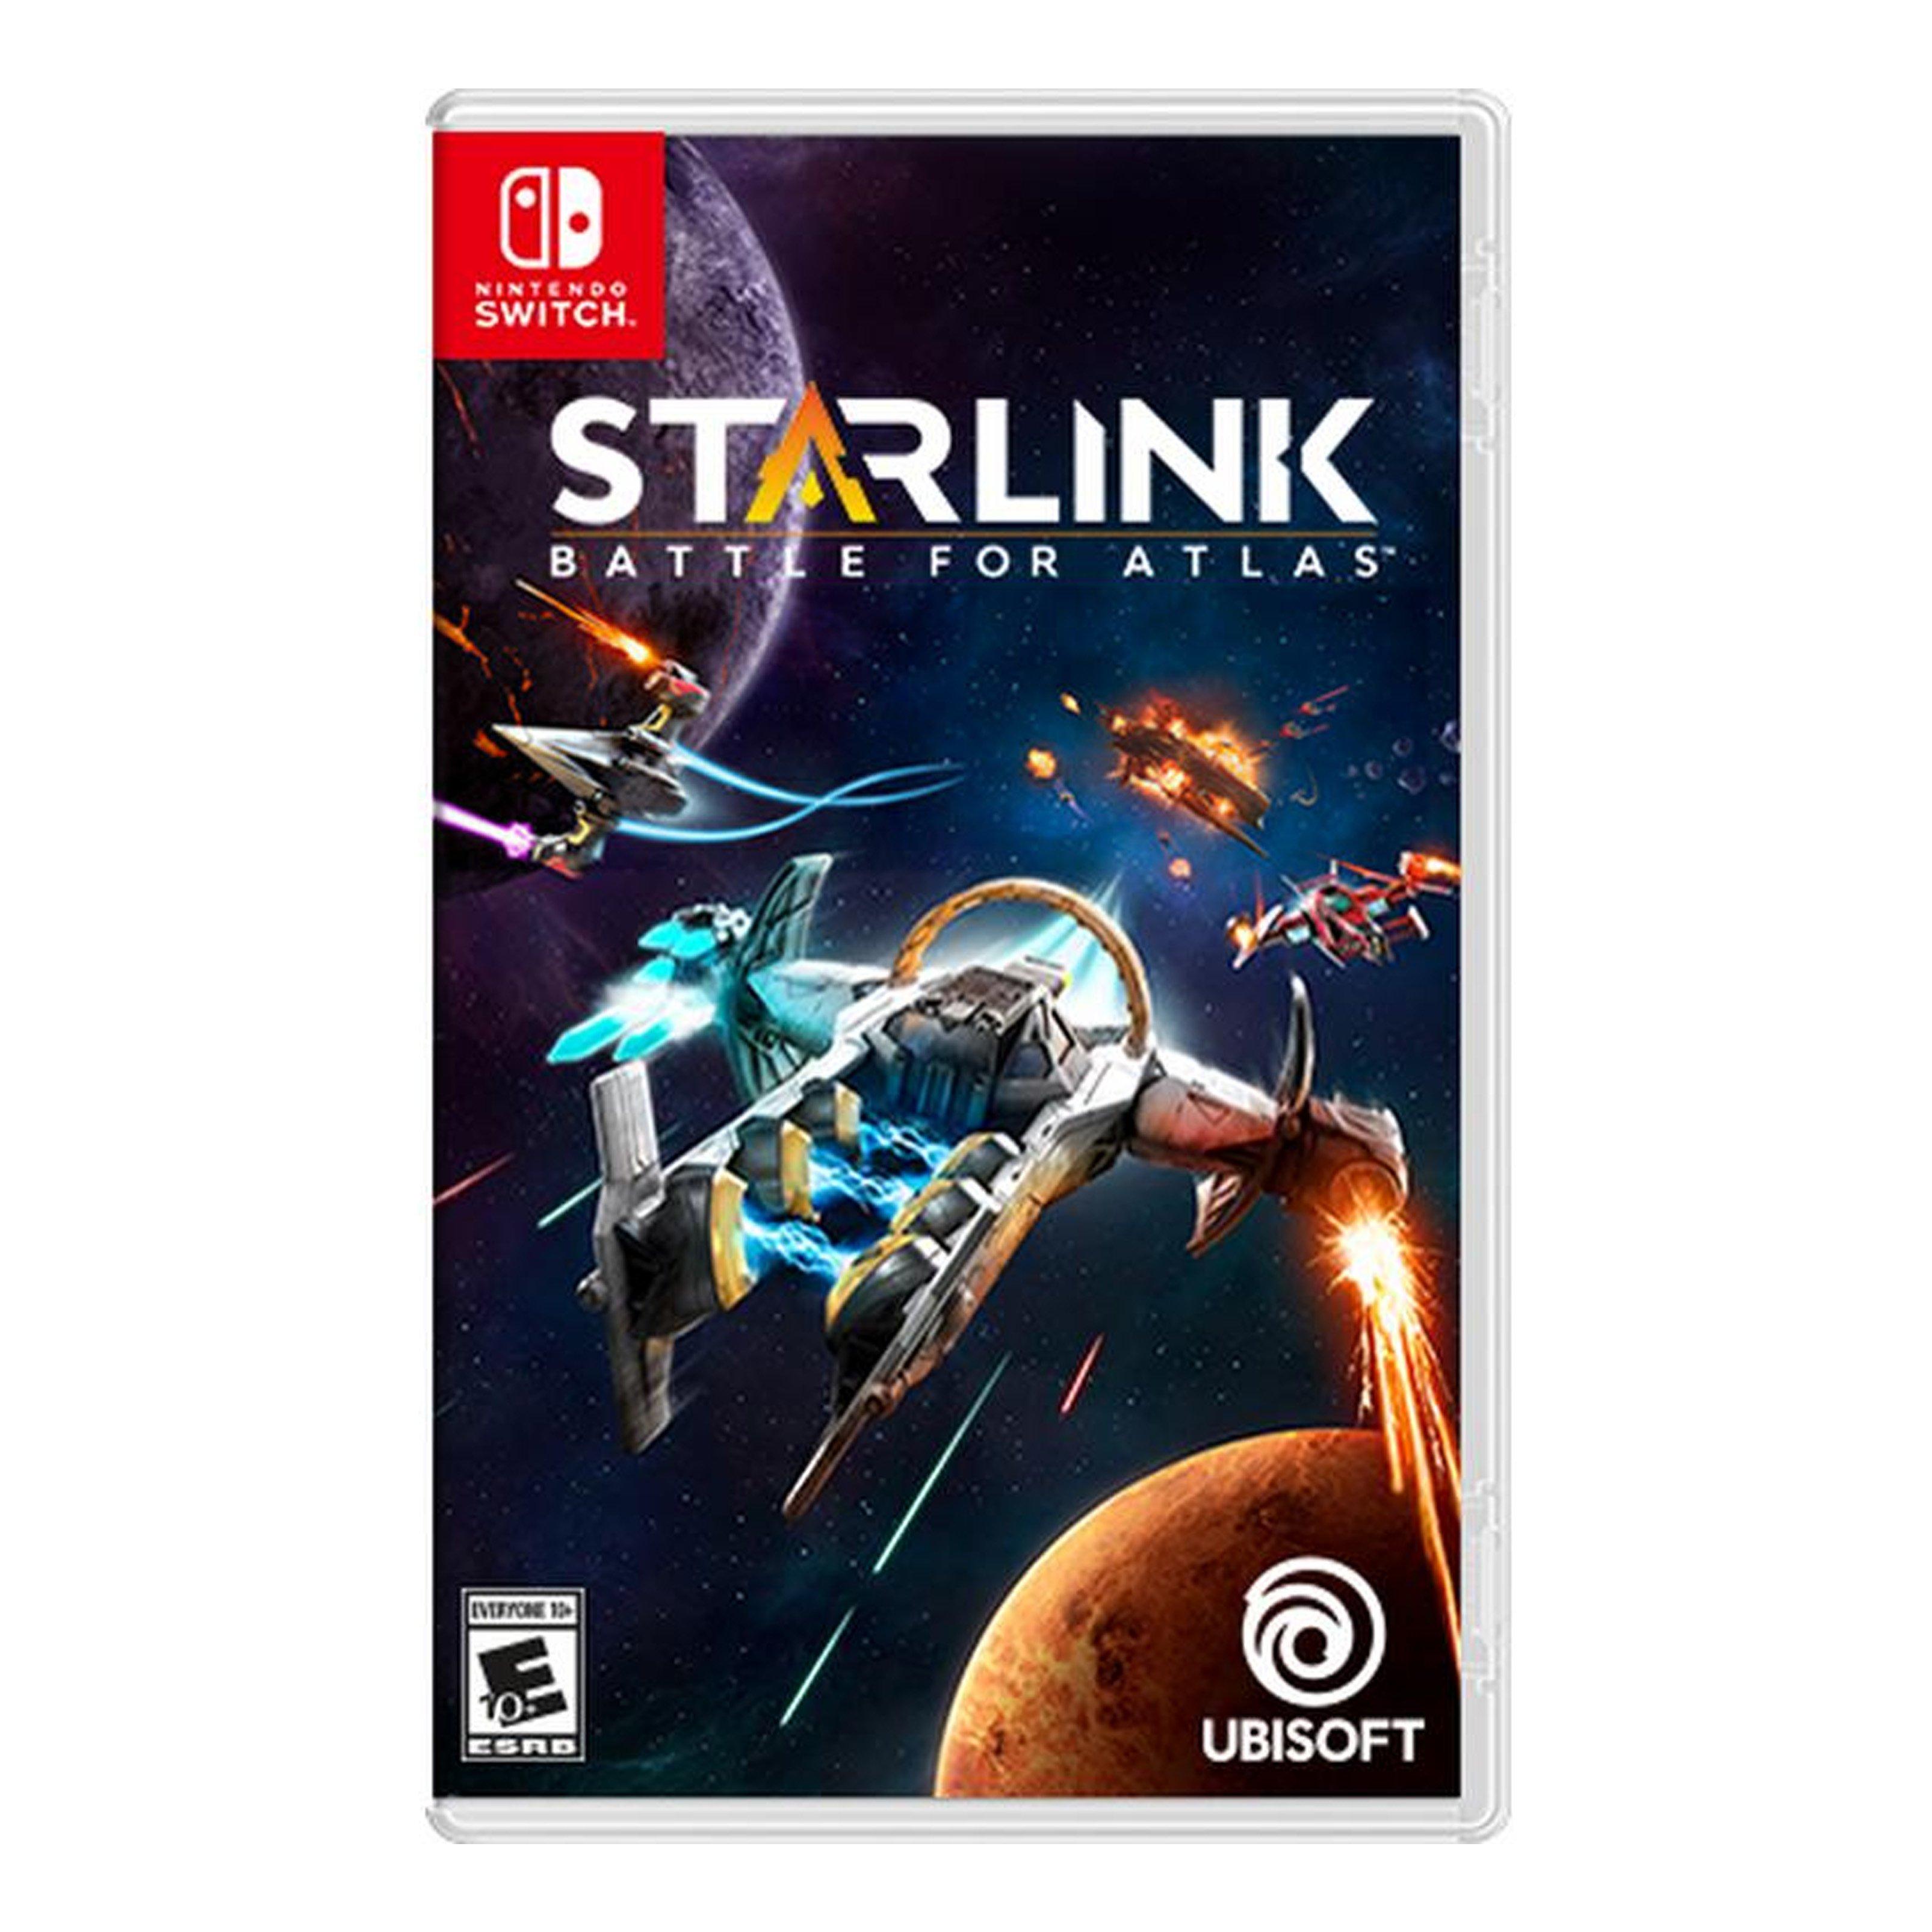 trade-in-starlink-battle-for-atlas-game-only-nintendo-switch-gamestop